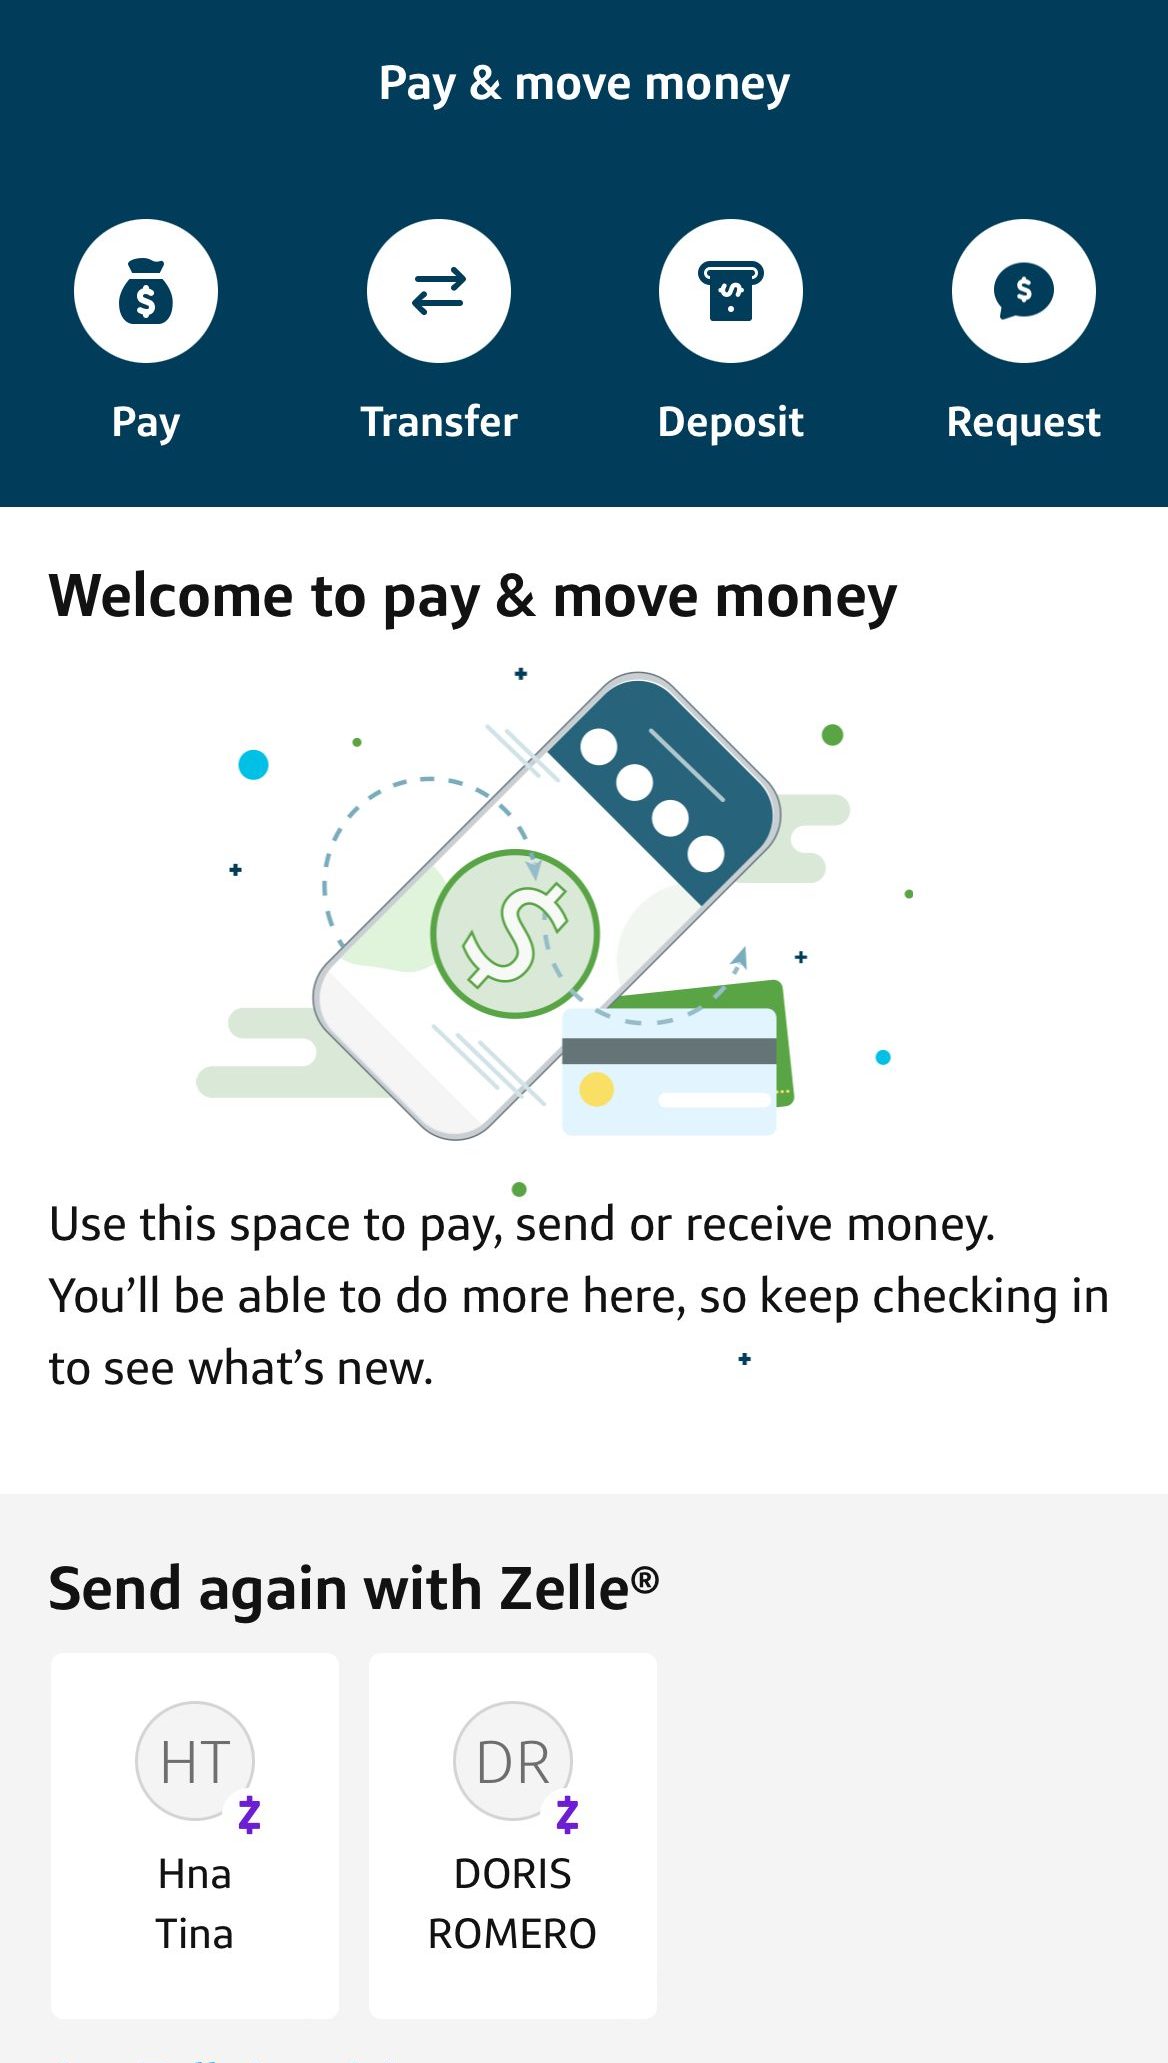 Capital One pay and move money